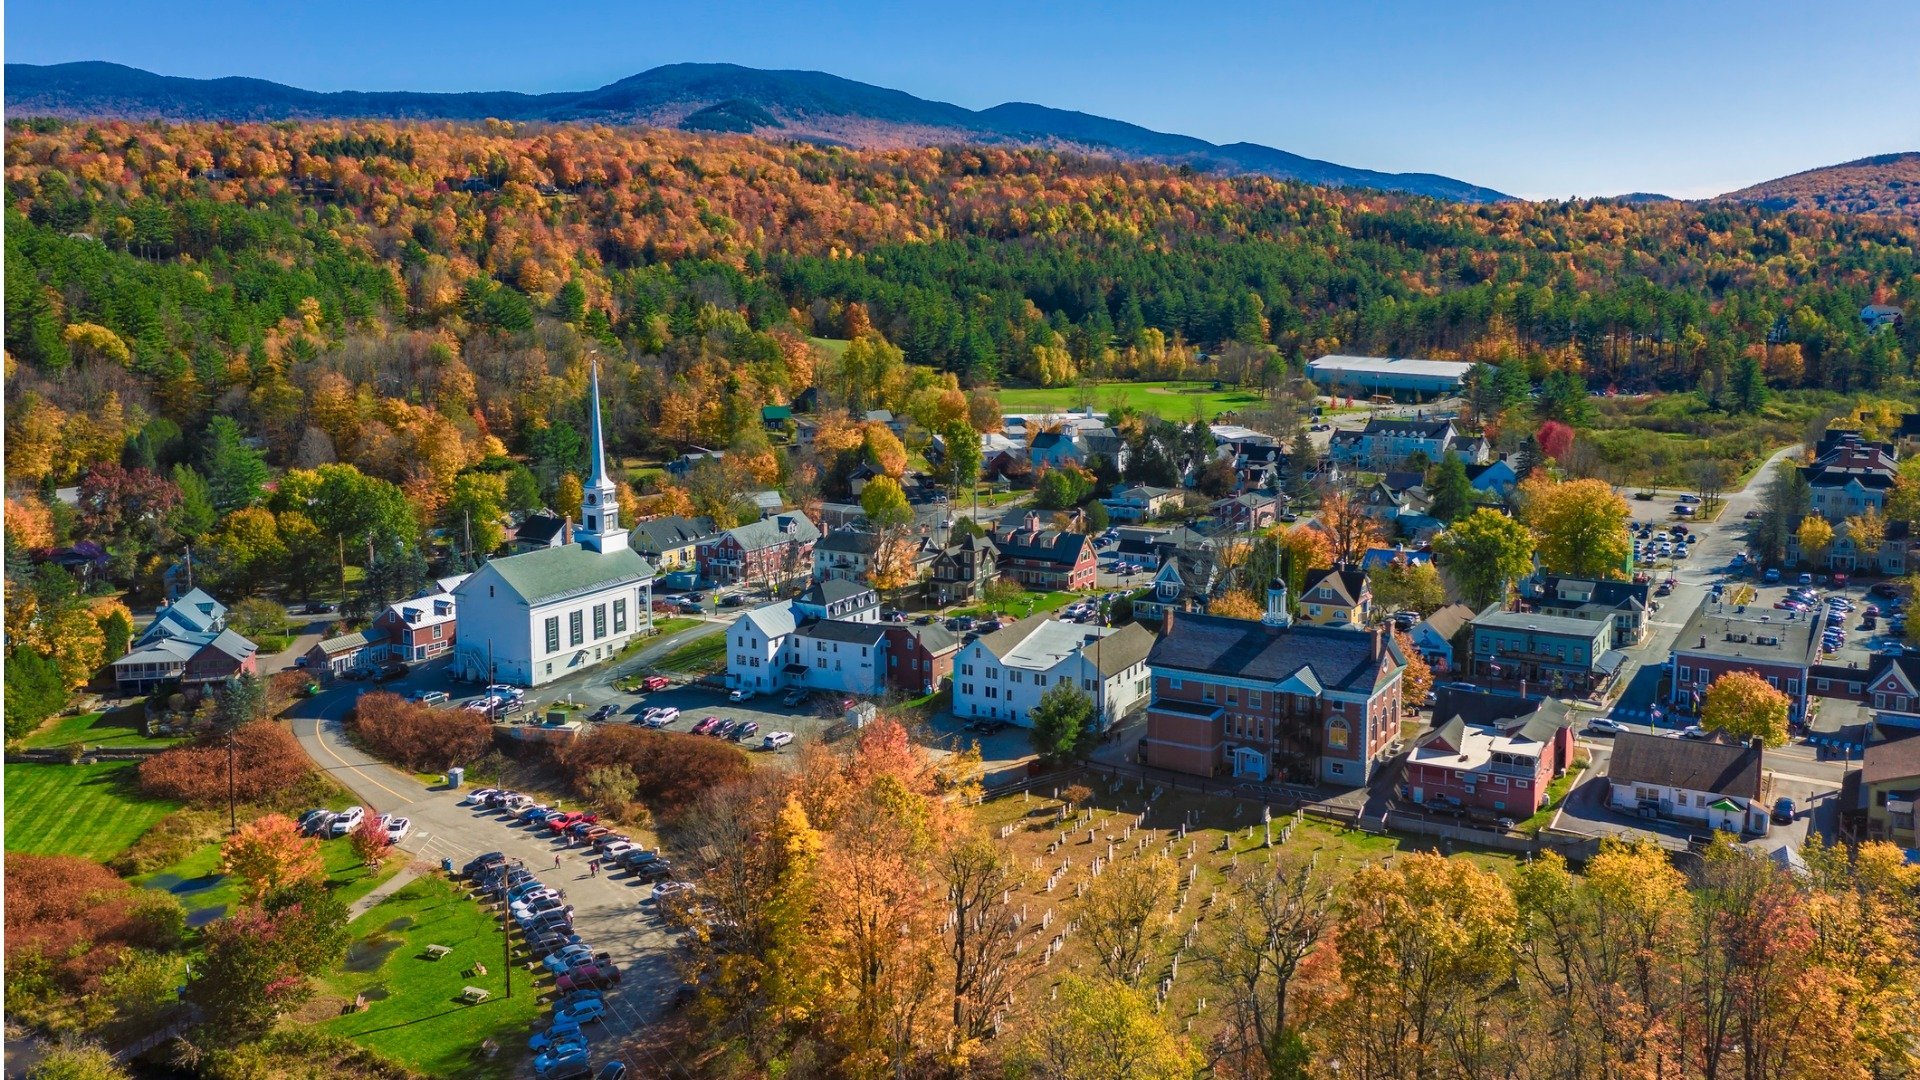 The Wealthiest Small Towns Throughout the United States